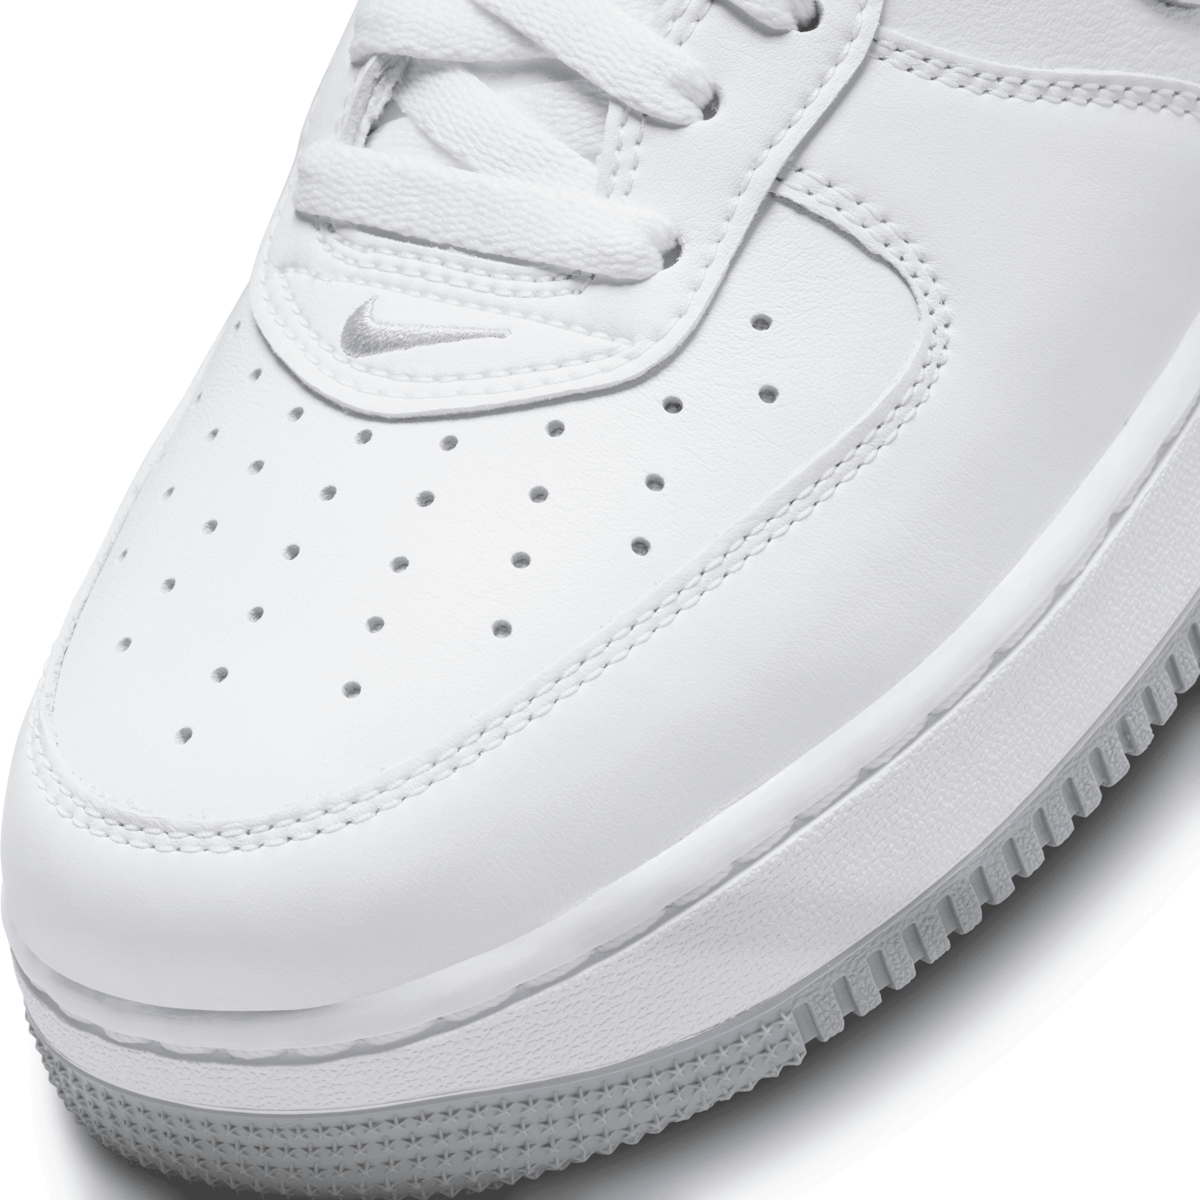 Nike Air Force 1 Low 40th Anniversary Metallic Silver Angle 1